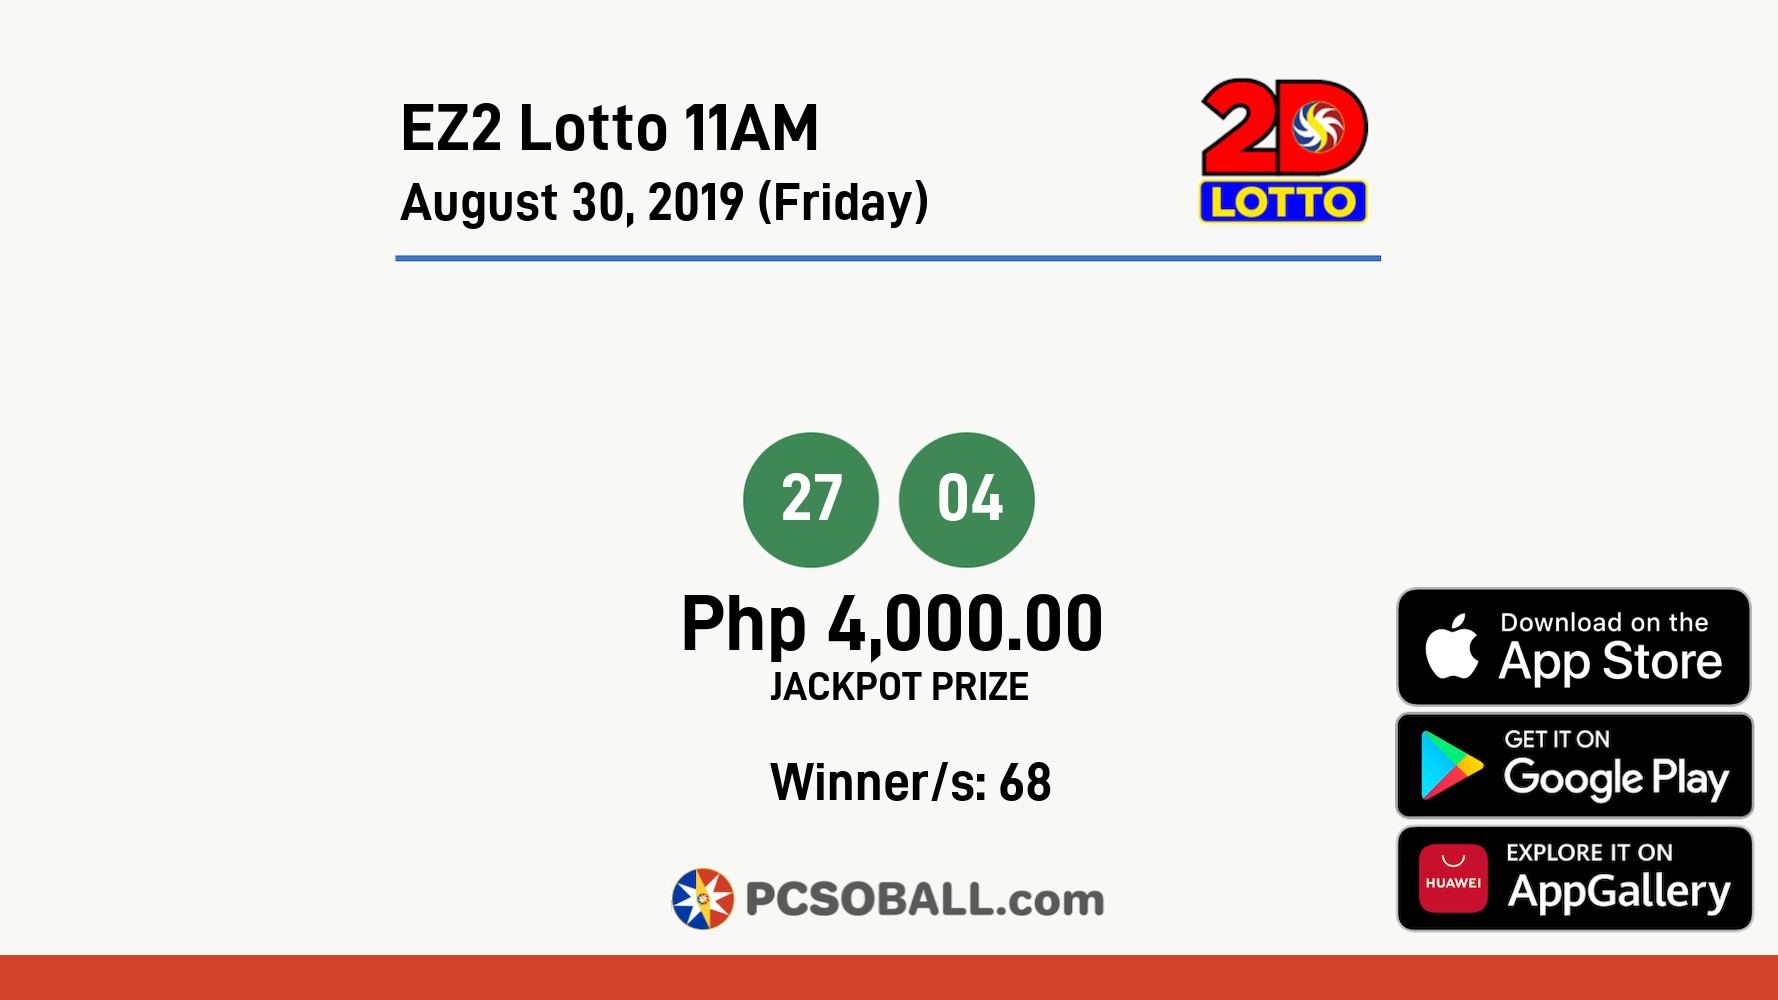 EZ2 Lotto 11AM August 30, 2019 (Friday) Result